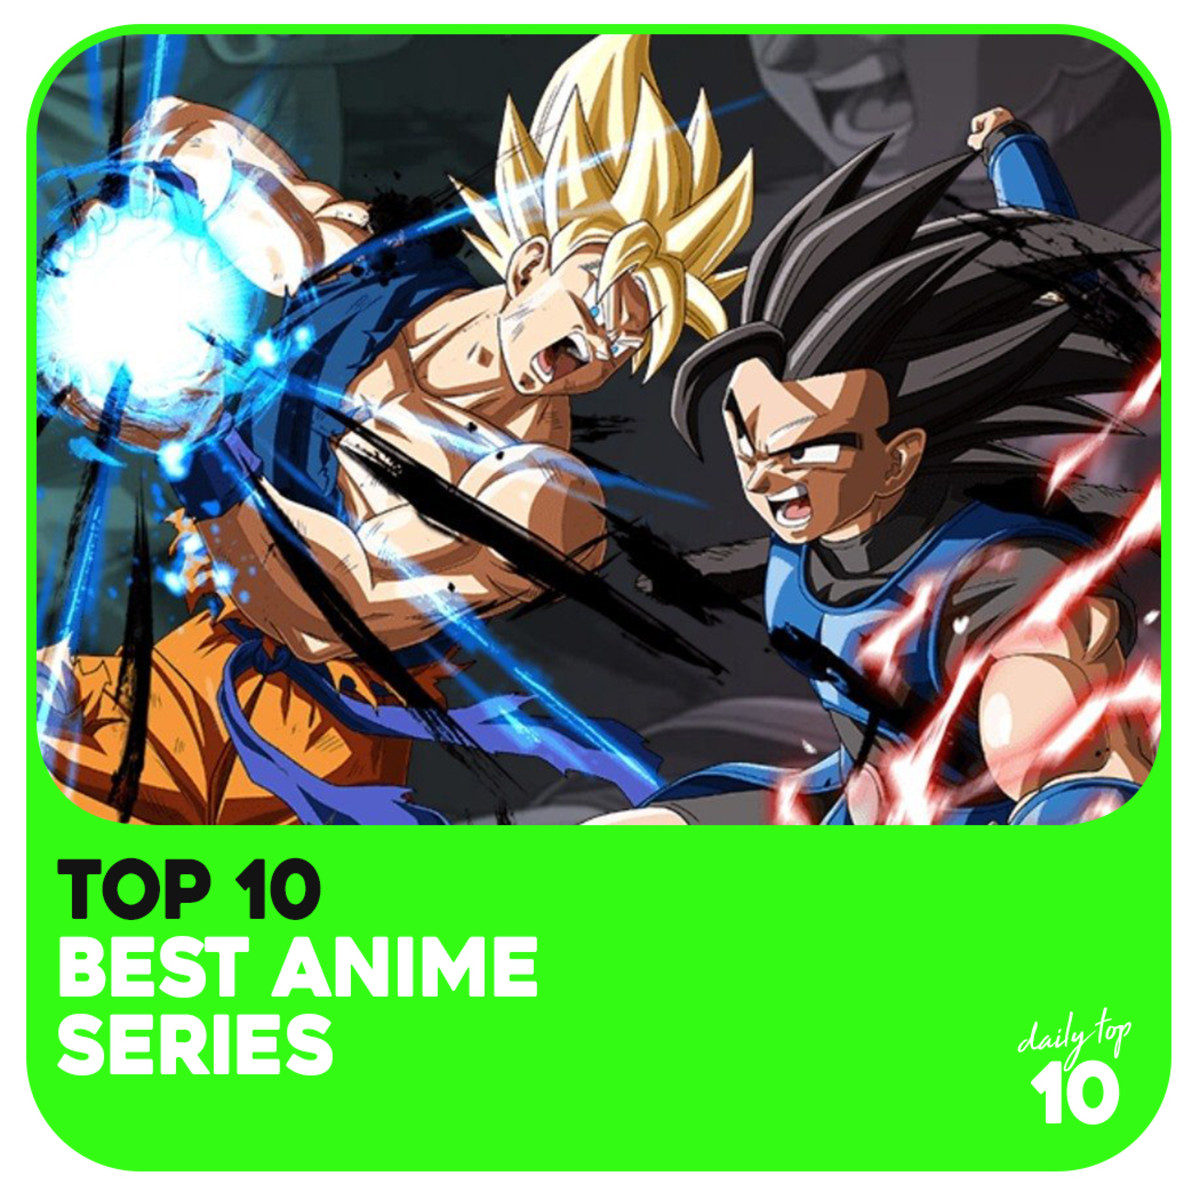 Top 10 Best Anime Series (Plus Honorable Mentions) - HubPages